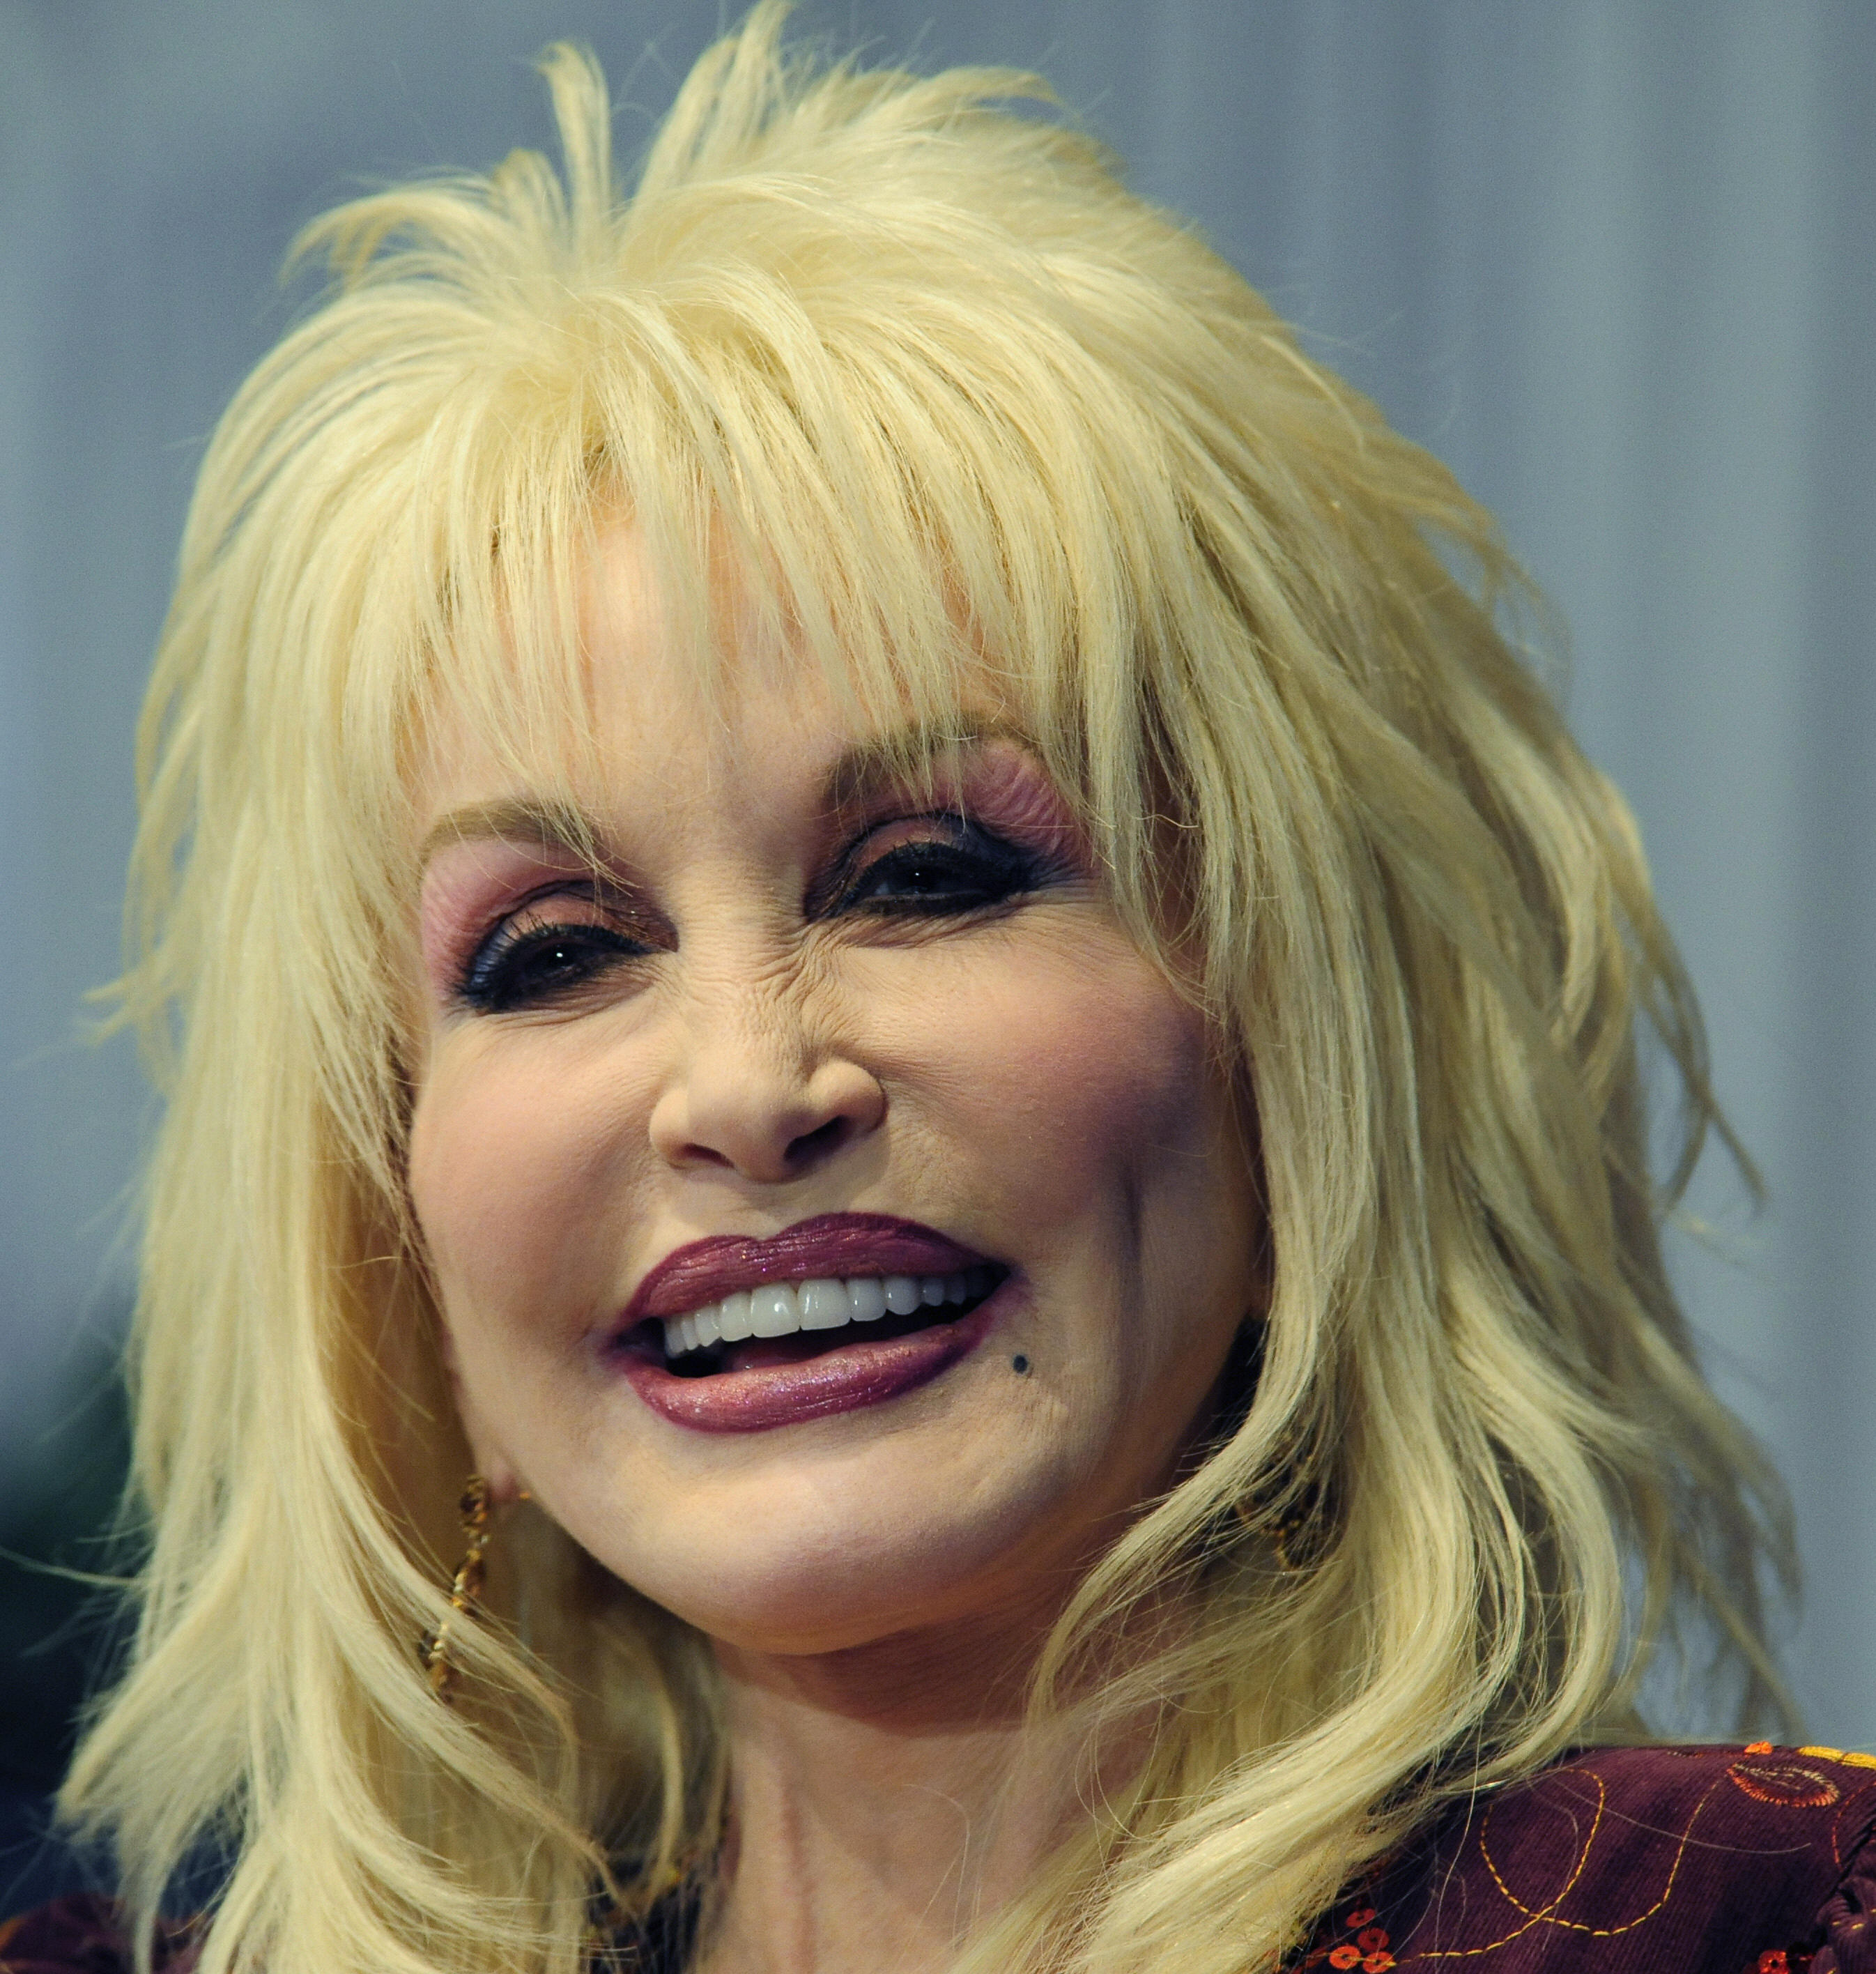 Dolly Parton addresses an audience at the National Press Club in Washington, DC on February 10, 2009. | Source: Getty Images